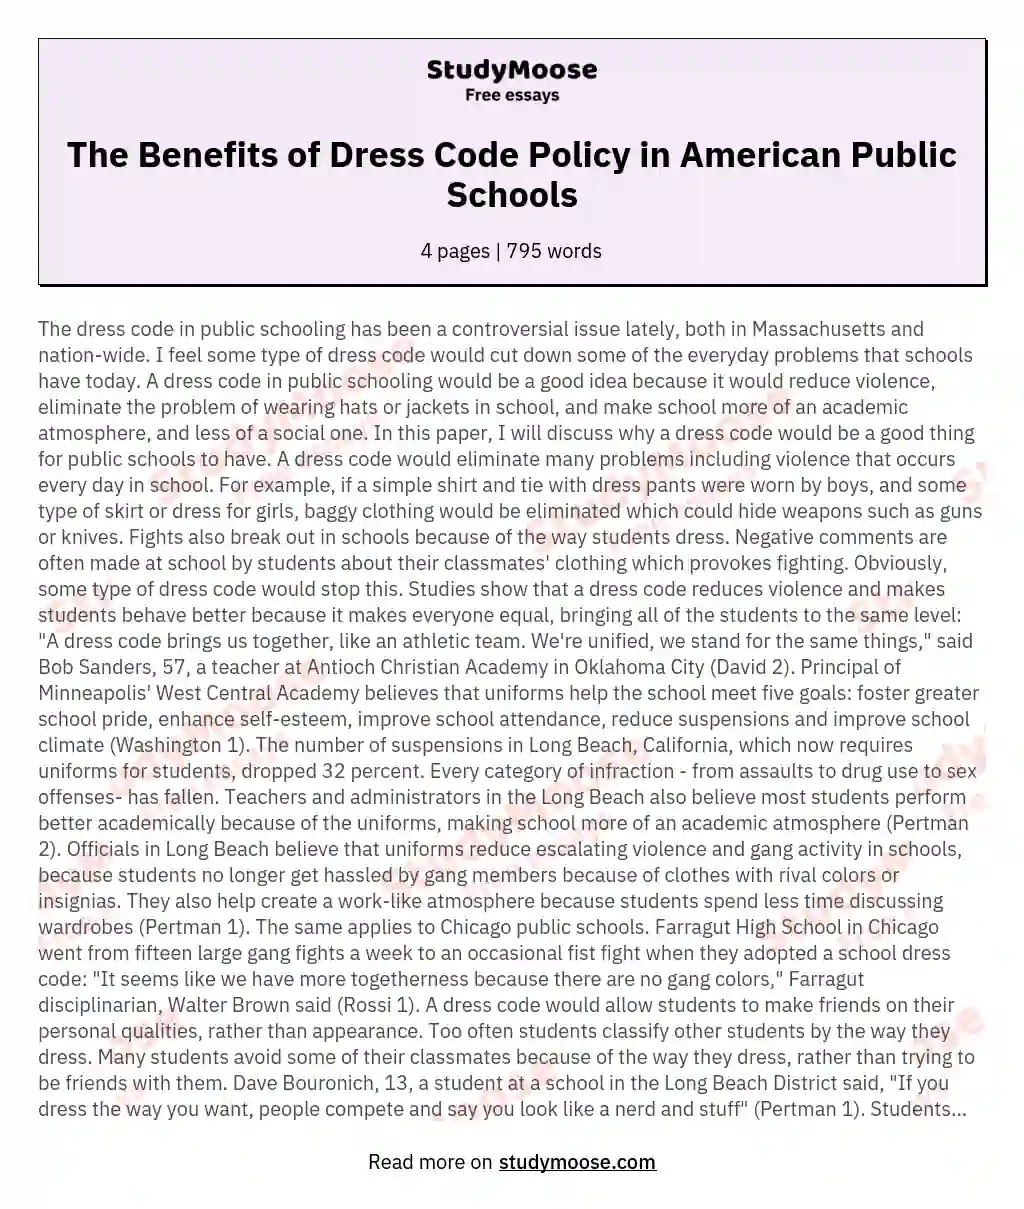 The Benefits of Dress Code Policy in American Public Schools essay